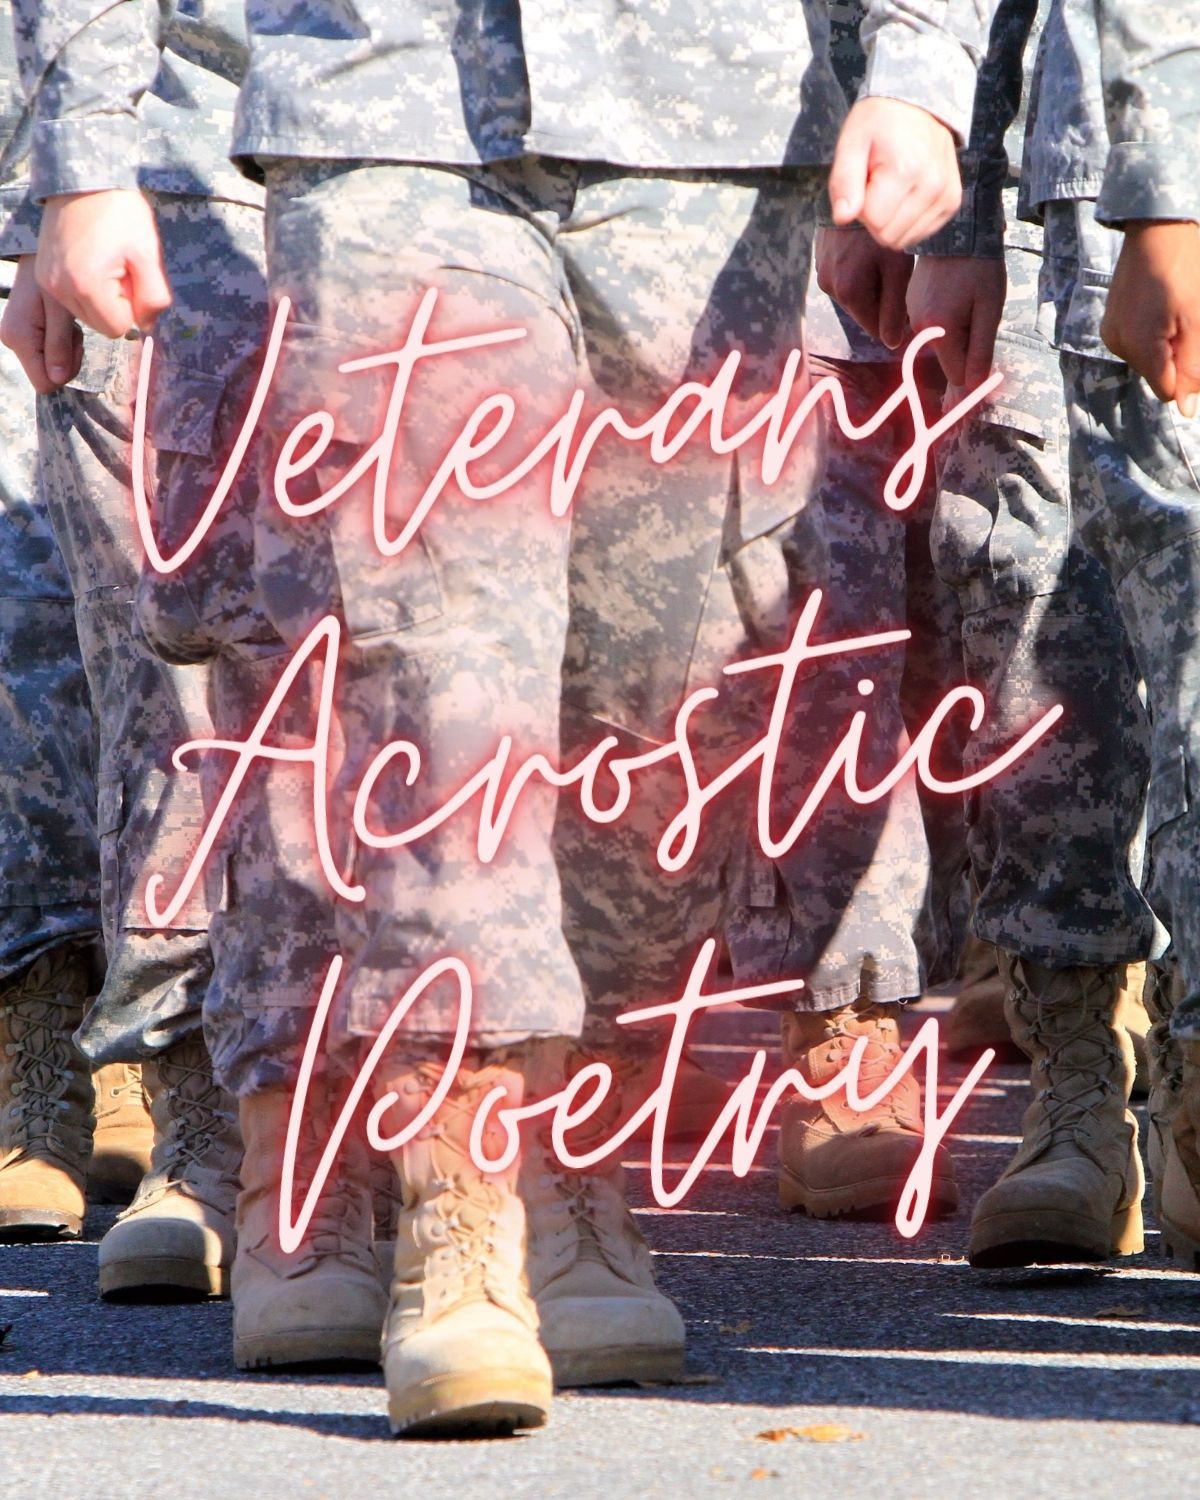 veterans acrostic poem ideas for school and home